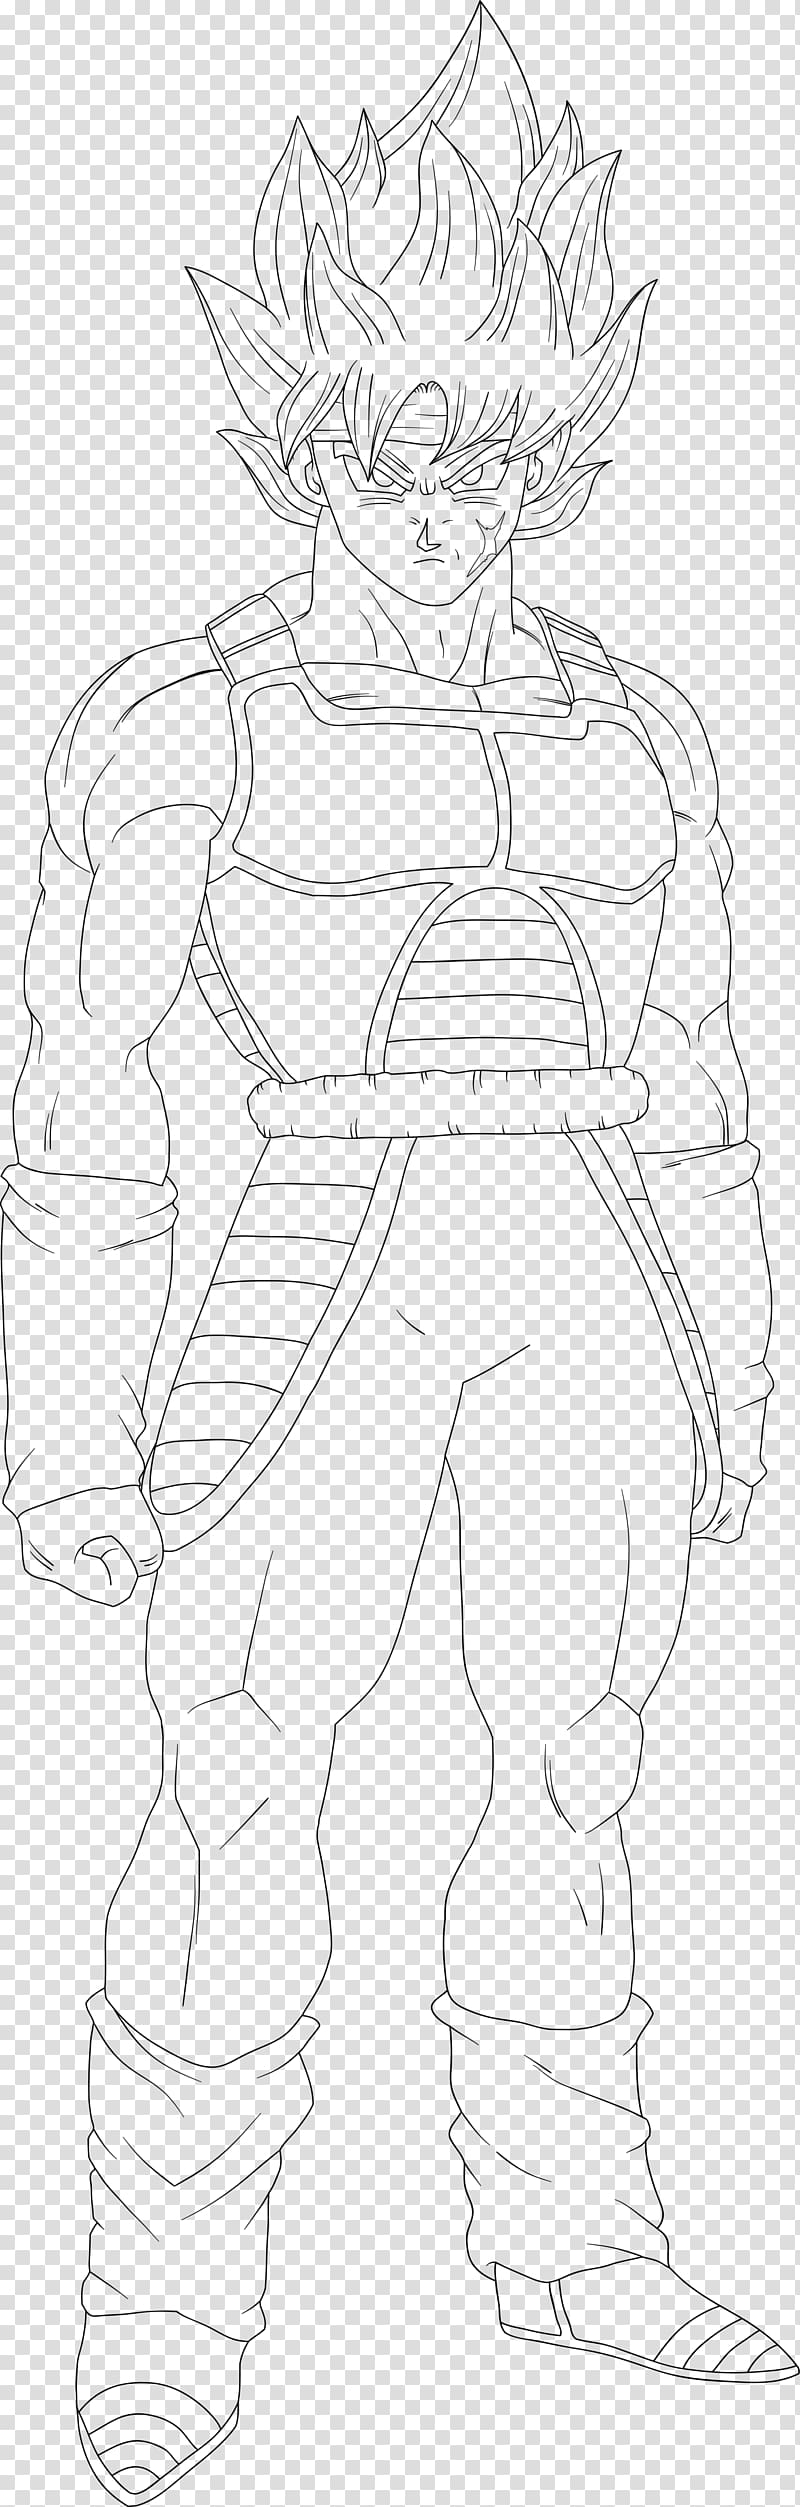 Inker Drawing Line art Cartoon Sketch, dragon ball drawing with color transparent background PNG clipart